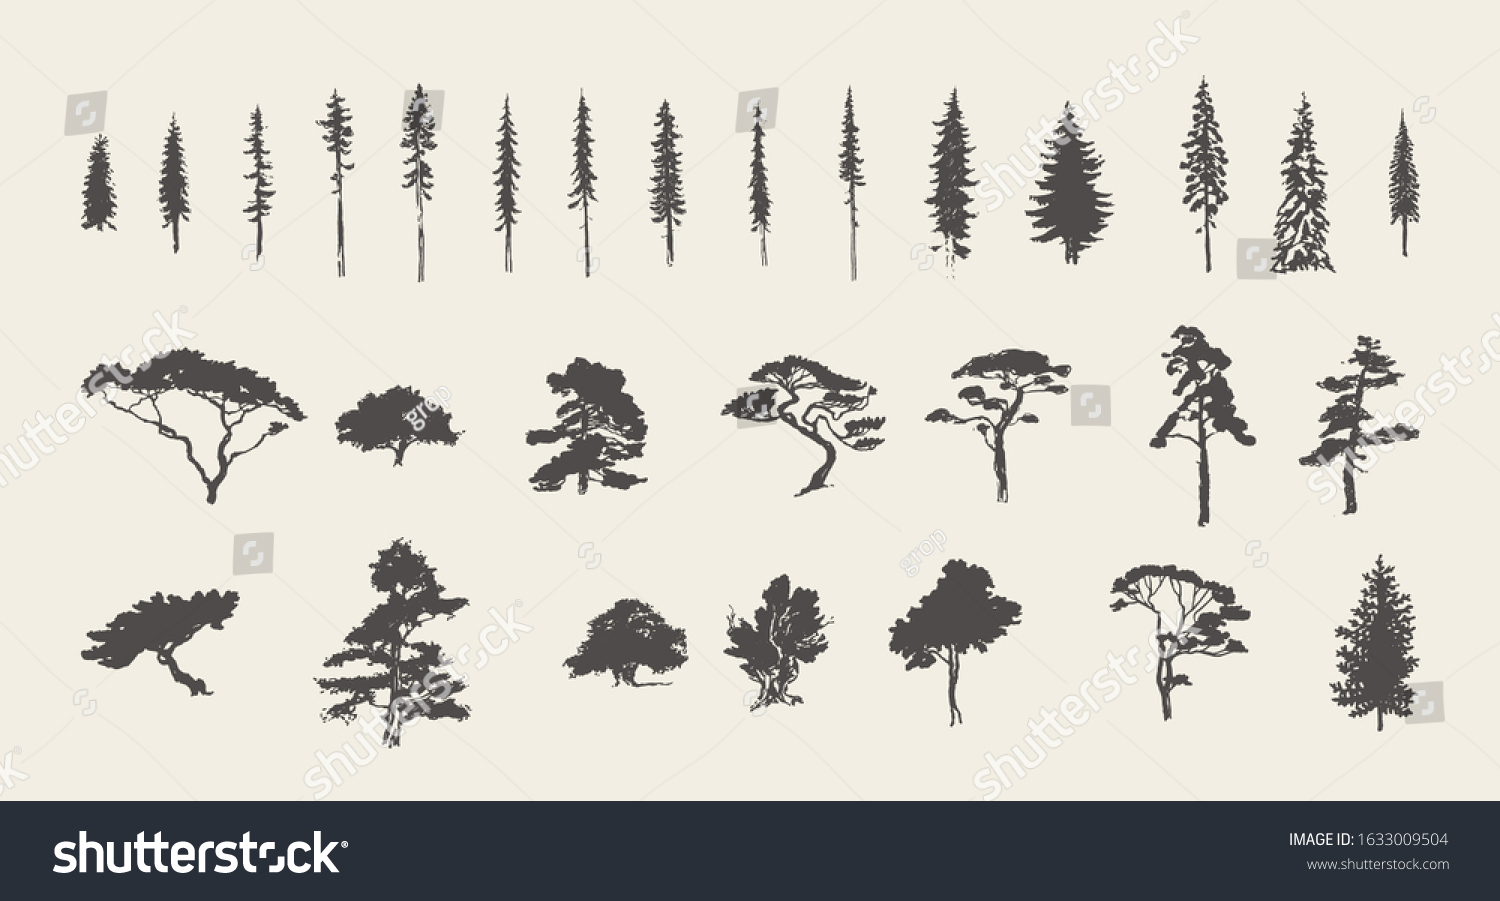 Set of silhouettes of coniferous trees. Pine, fir, spruce, cedar, larch. Hand drawn vector illustration, sketch #1633009504